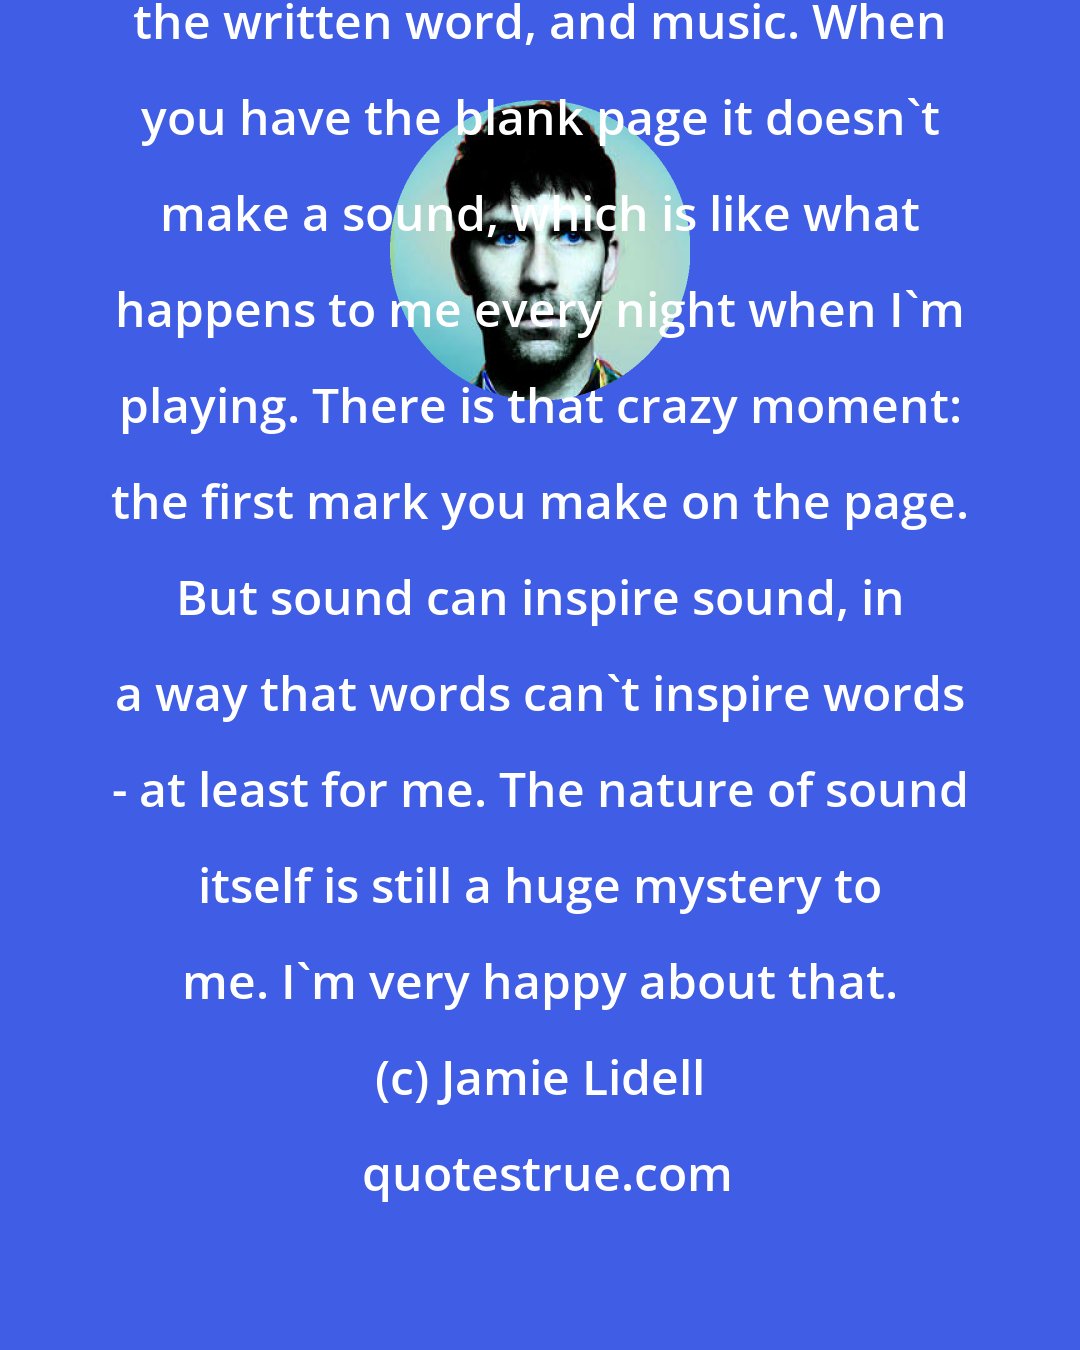 Jamie Lidell: There's a difference between writing, the written word, and music. When you have the blank page it doesn't make a sound, which is like what happens to me every night when I'm playing. There is that crazy moment: the first mark you make on the page. But sound can inspire sound, in a way that words can't inspire words - at least for me. The nature of sound itself is still a huge mystery to me. I'm very happy about that.